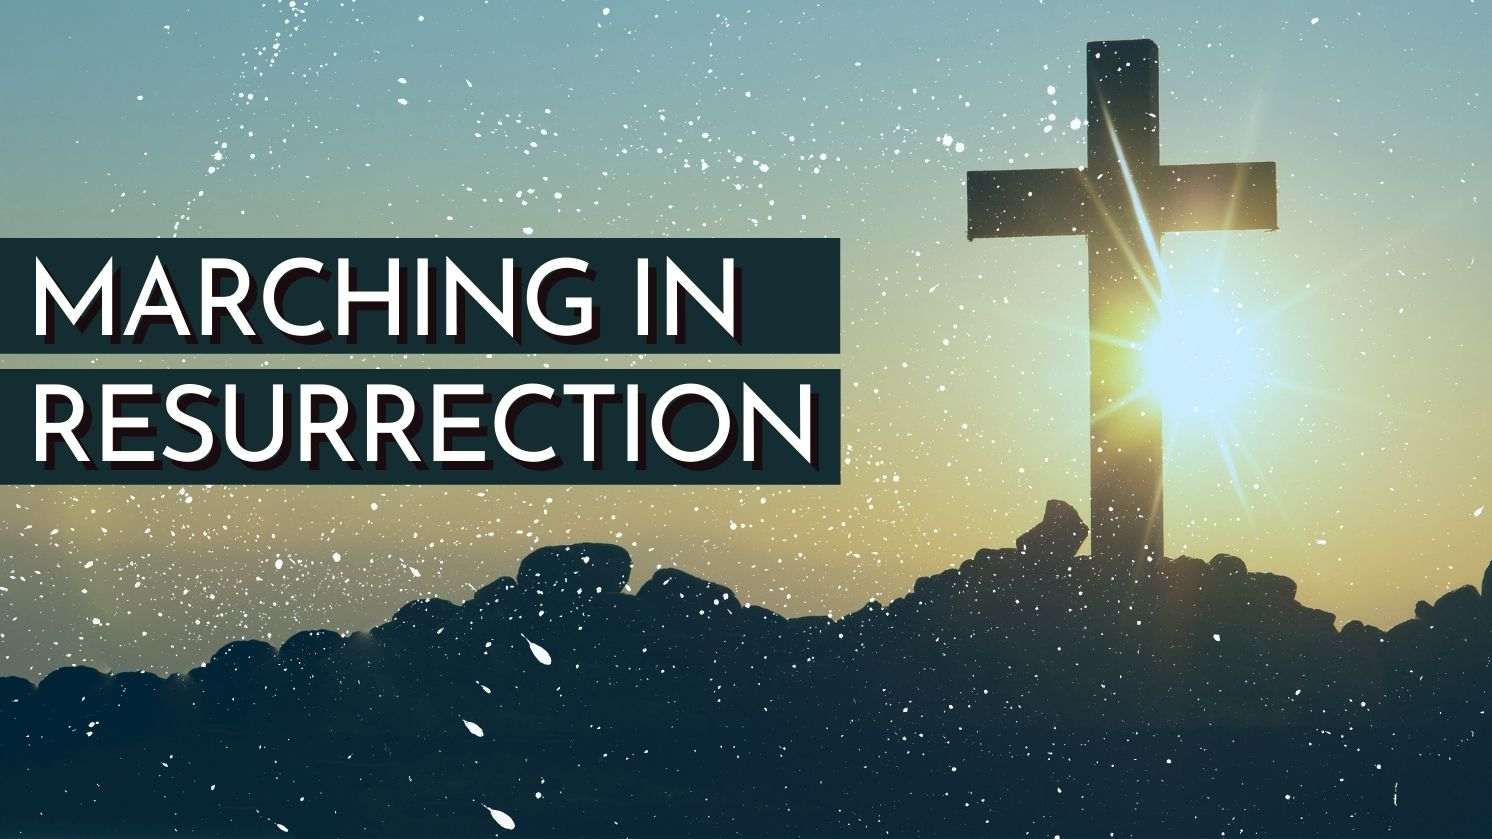 Marching in Resurrection